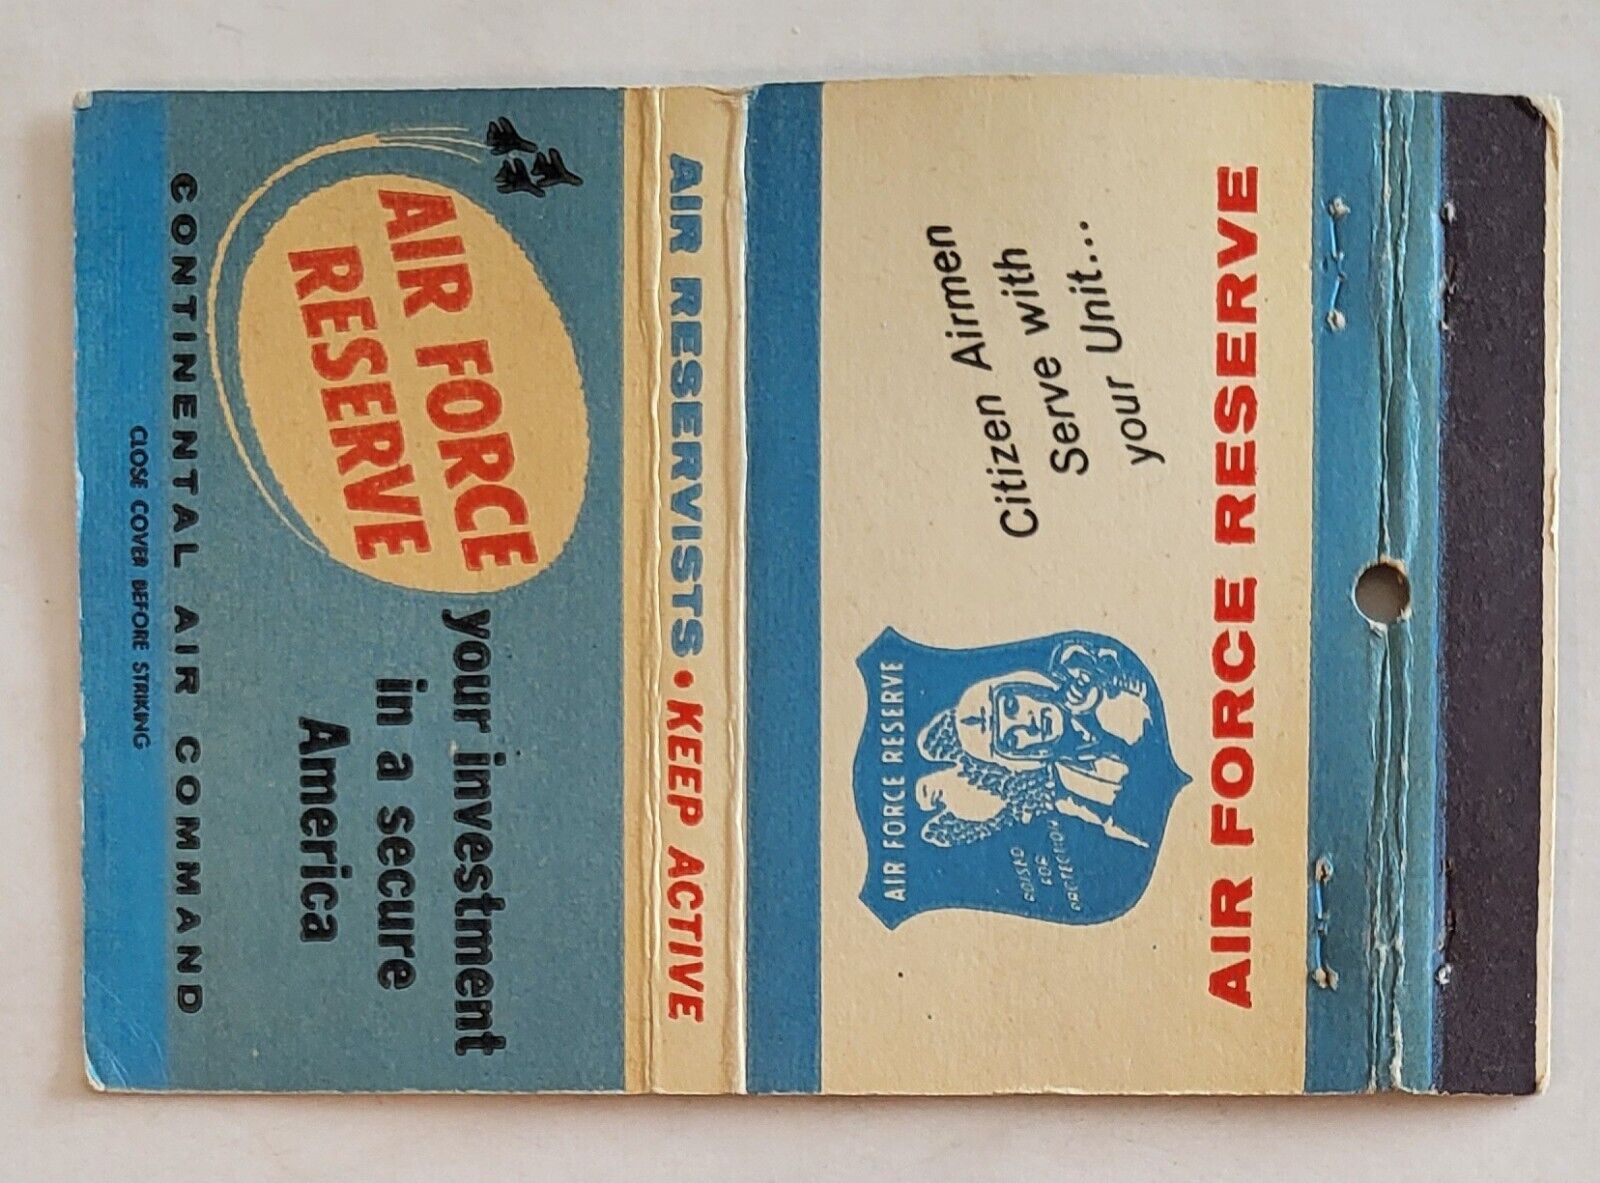 Vintage Matchbook Cover....Air Force Reserve & Recruiting Information 